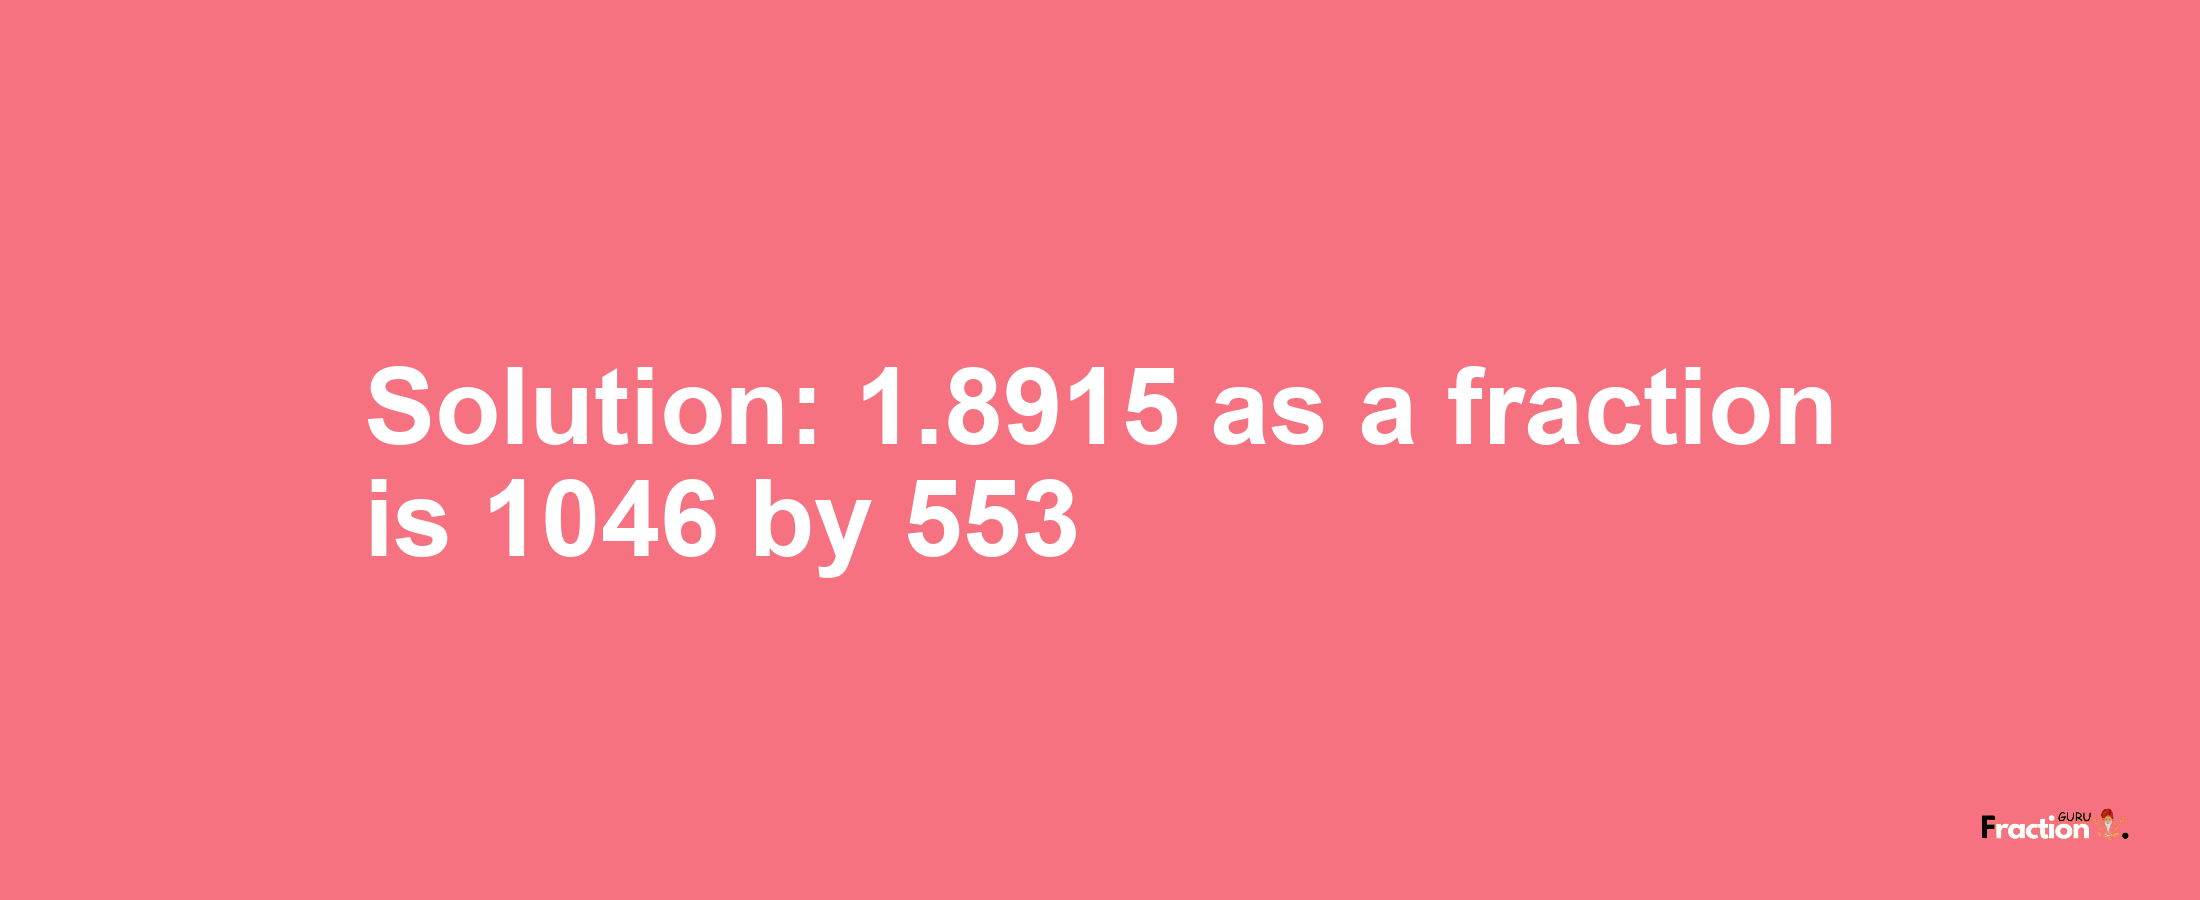 Solution:1.8915 as a fraction is 1046/553